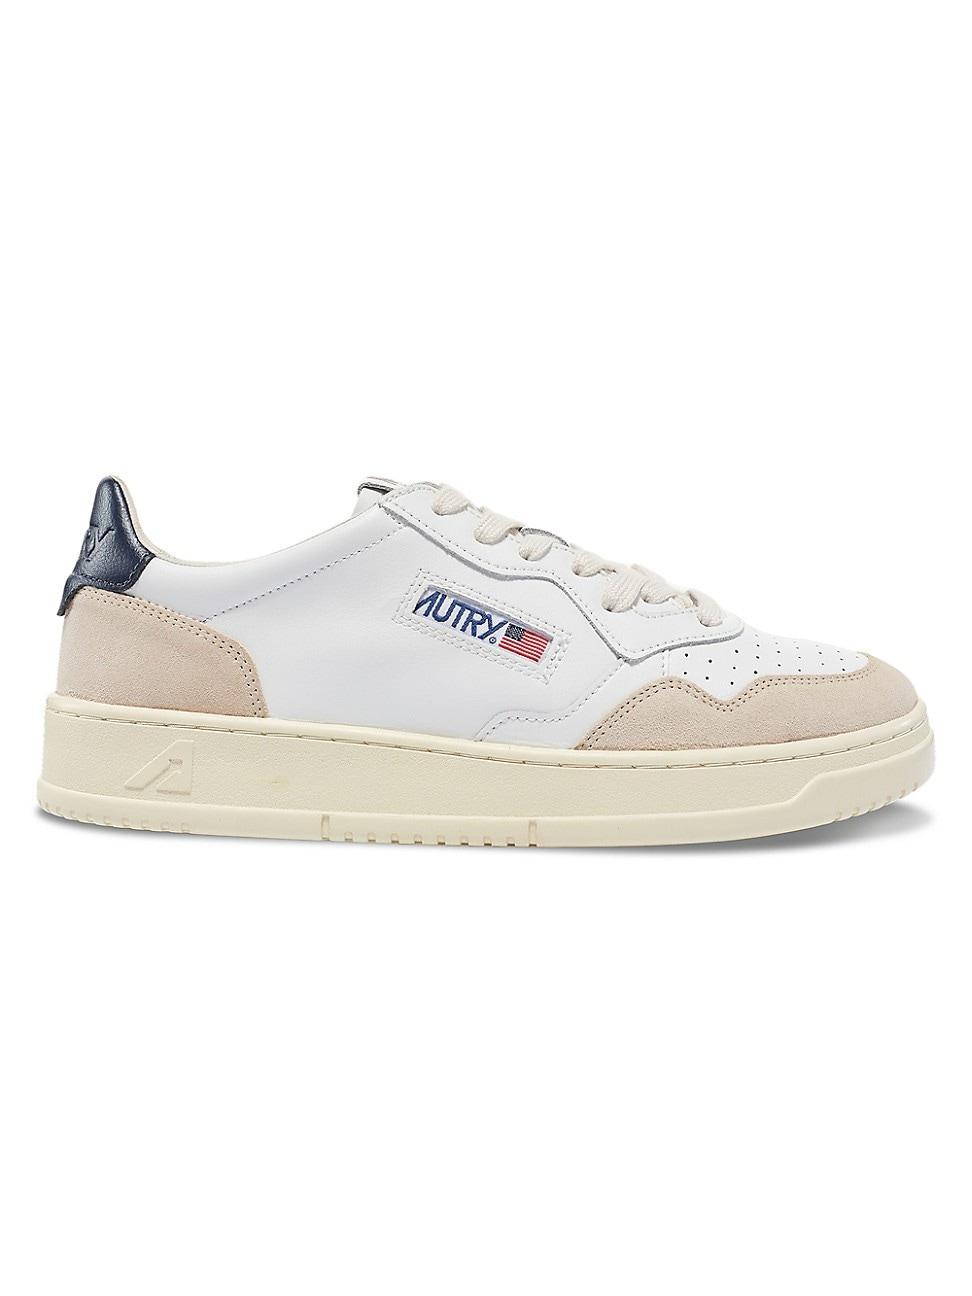 Womens Supreme Vintage Low-Top Sneakers Product Image